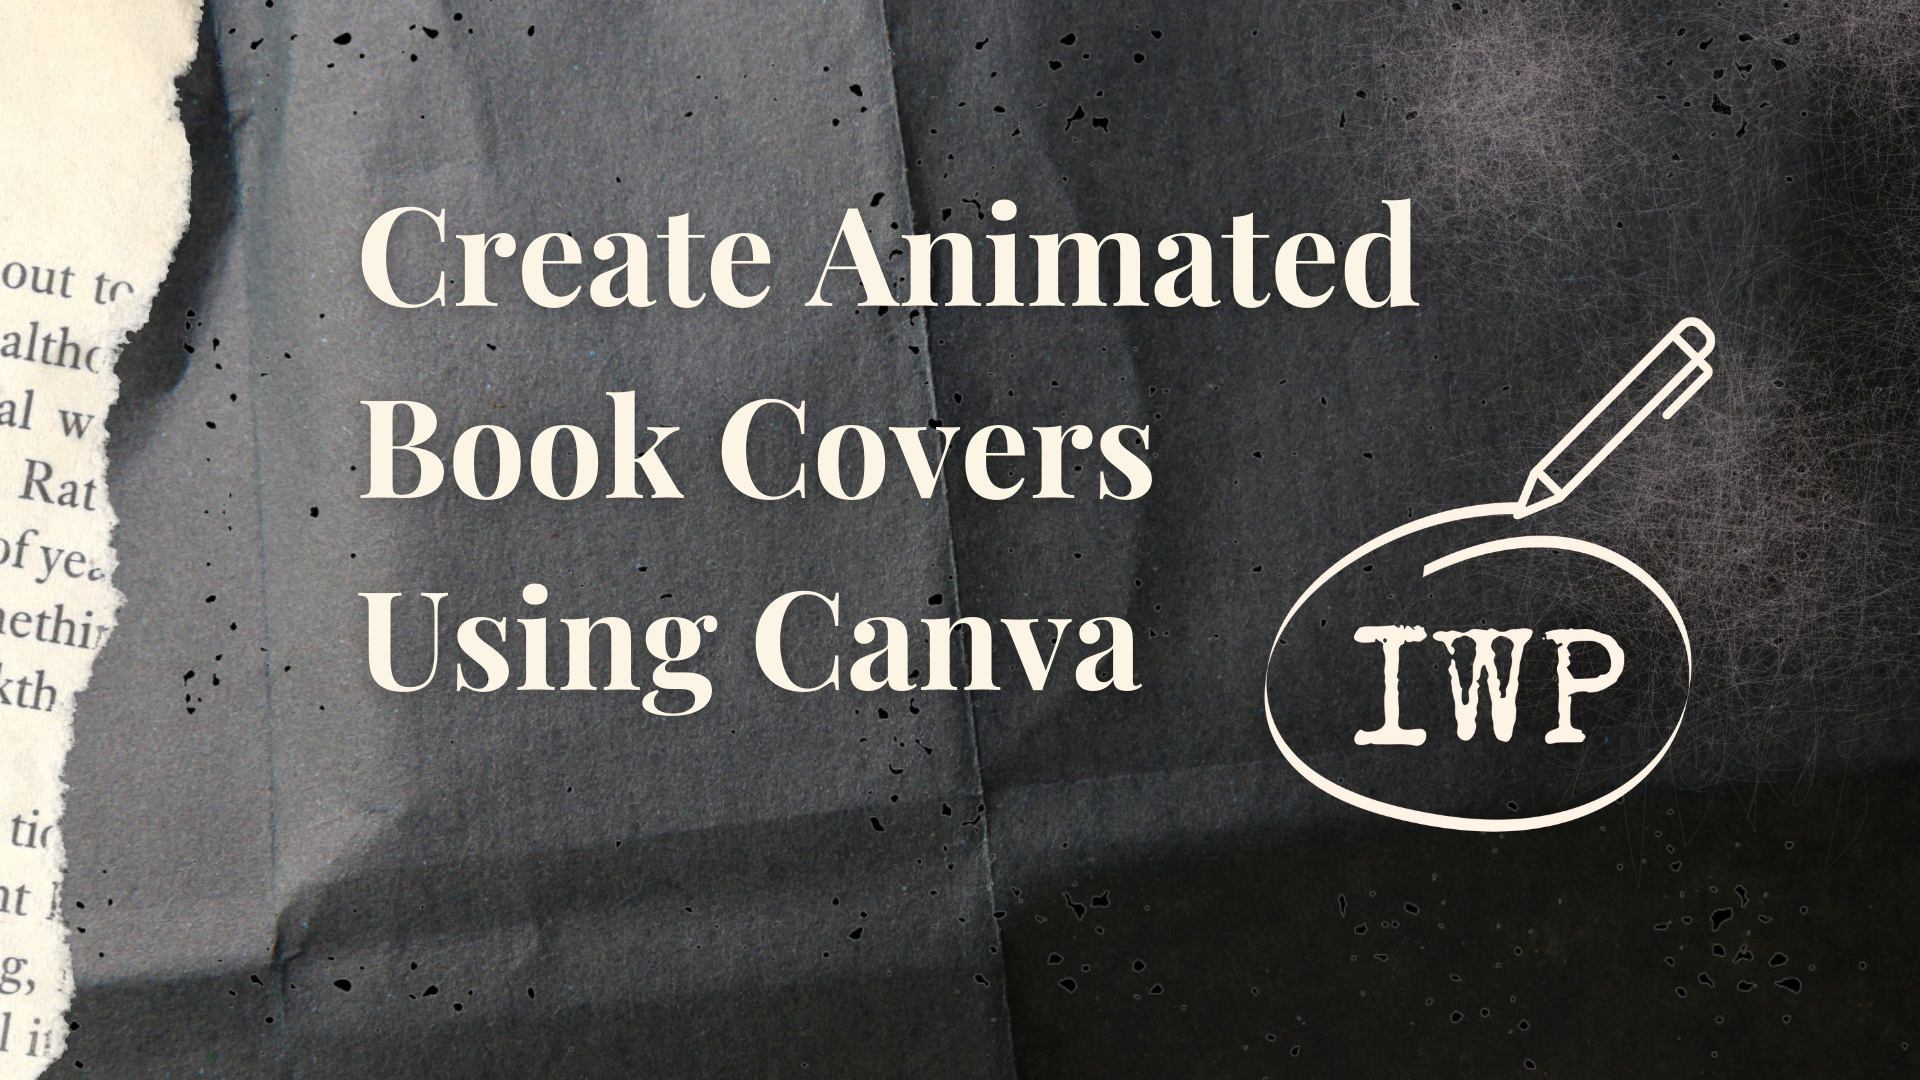 Create animated book covers using canva.